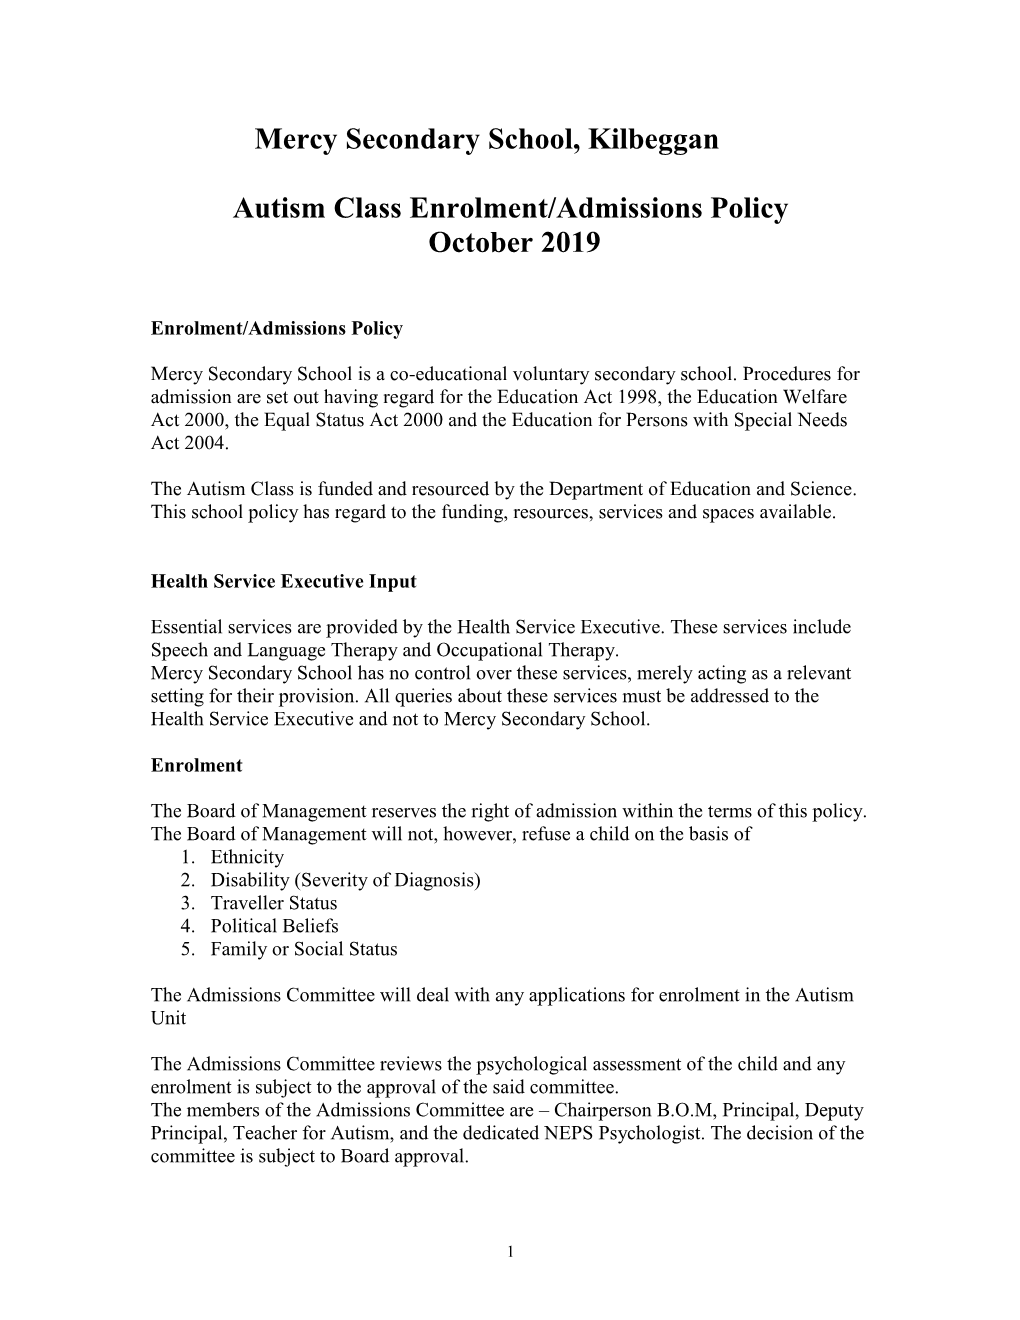 Autism Class Admissions Policy 2019